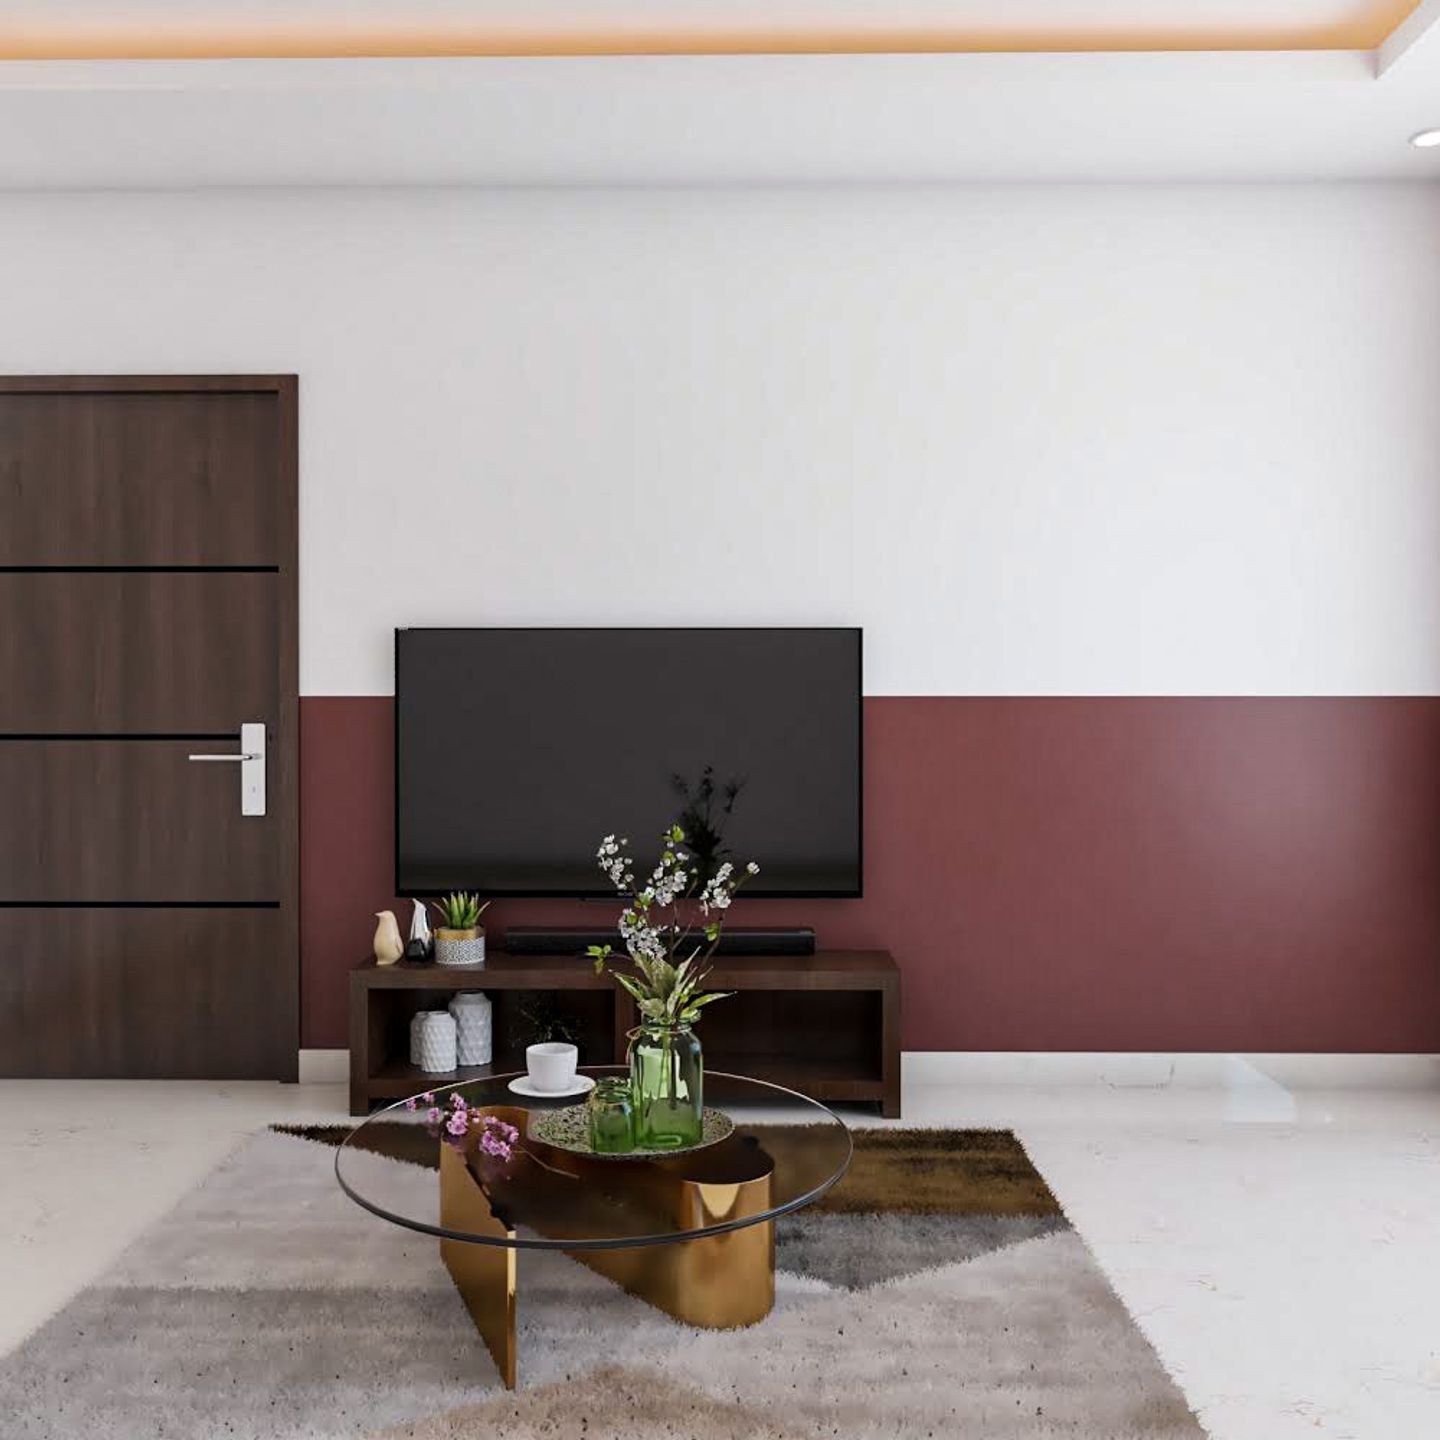 Maroon Solid Wall Paint Wall Design - Livspace